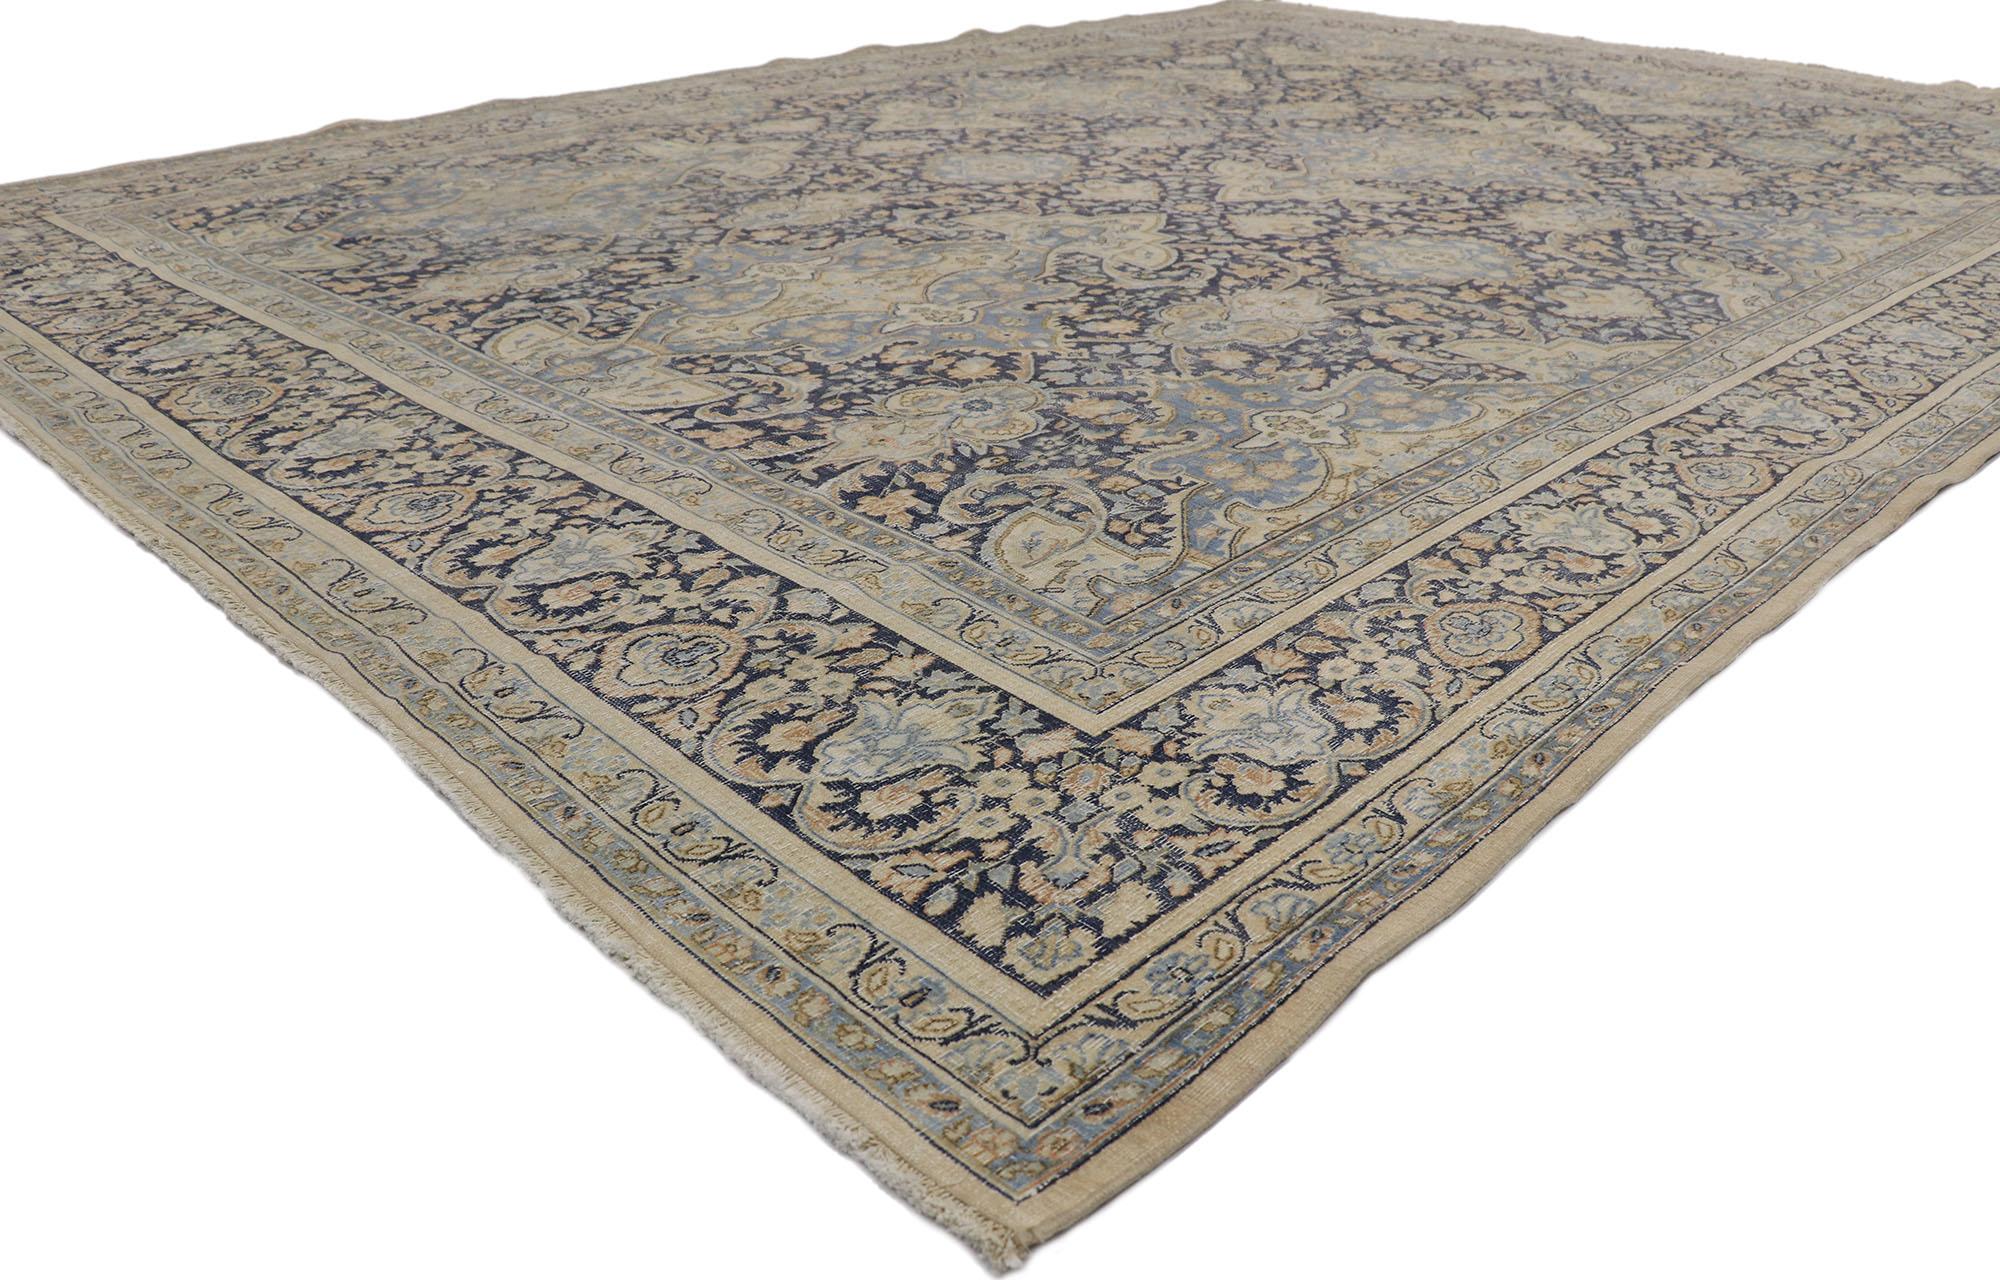 53631 Distressed Antique Persian Kerman rug with Rustic style 09'05 x 12'09. Effortlessly chic with rustic sensibility, this hand knotted wool distressed antique Persian Kerman rug beautifully is a captivating vision of woven beauty. The lovingly